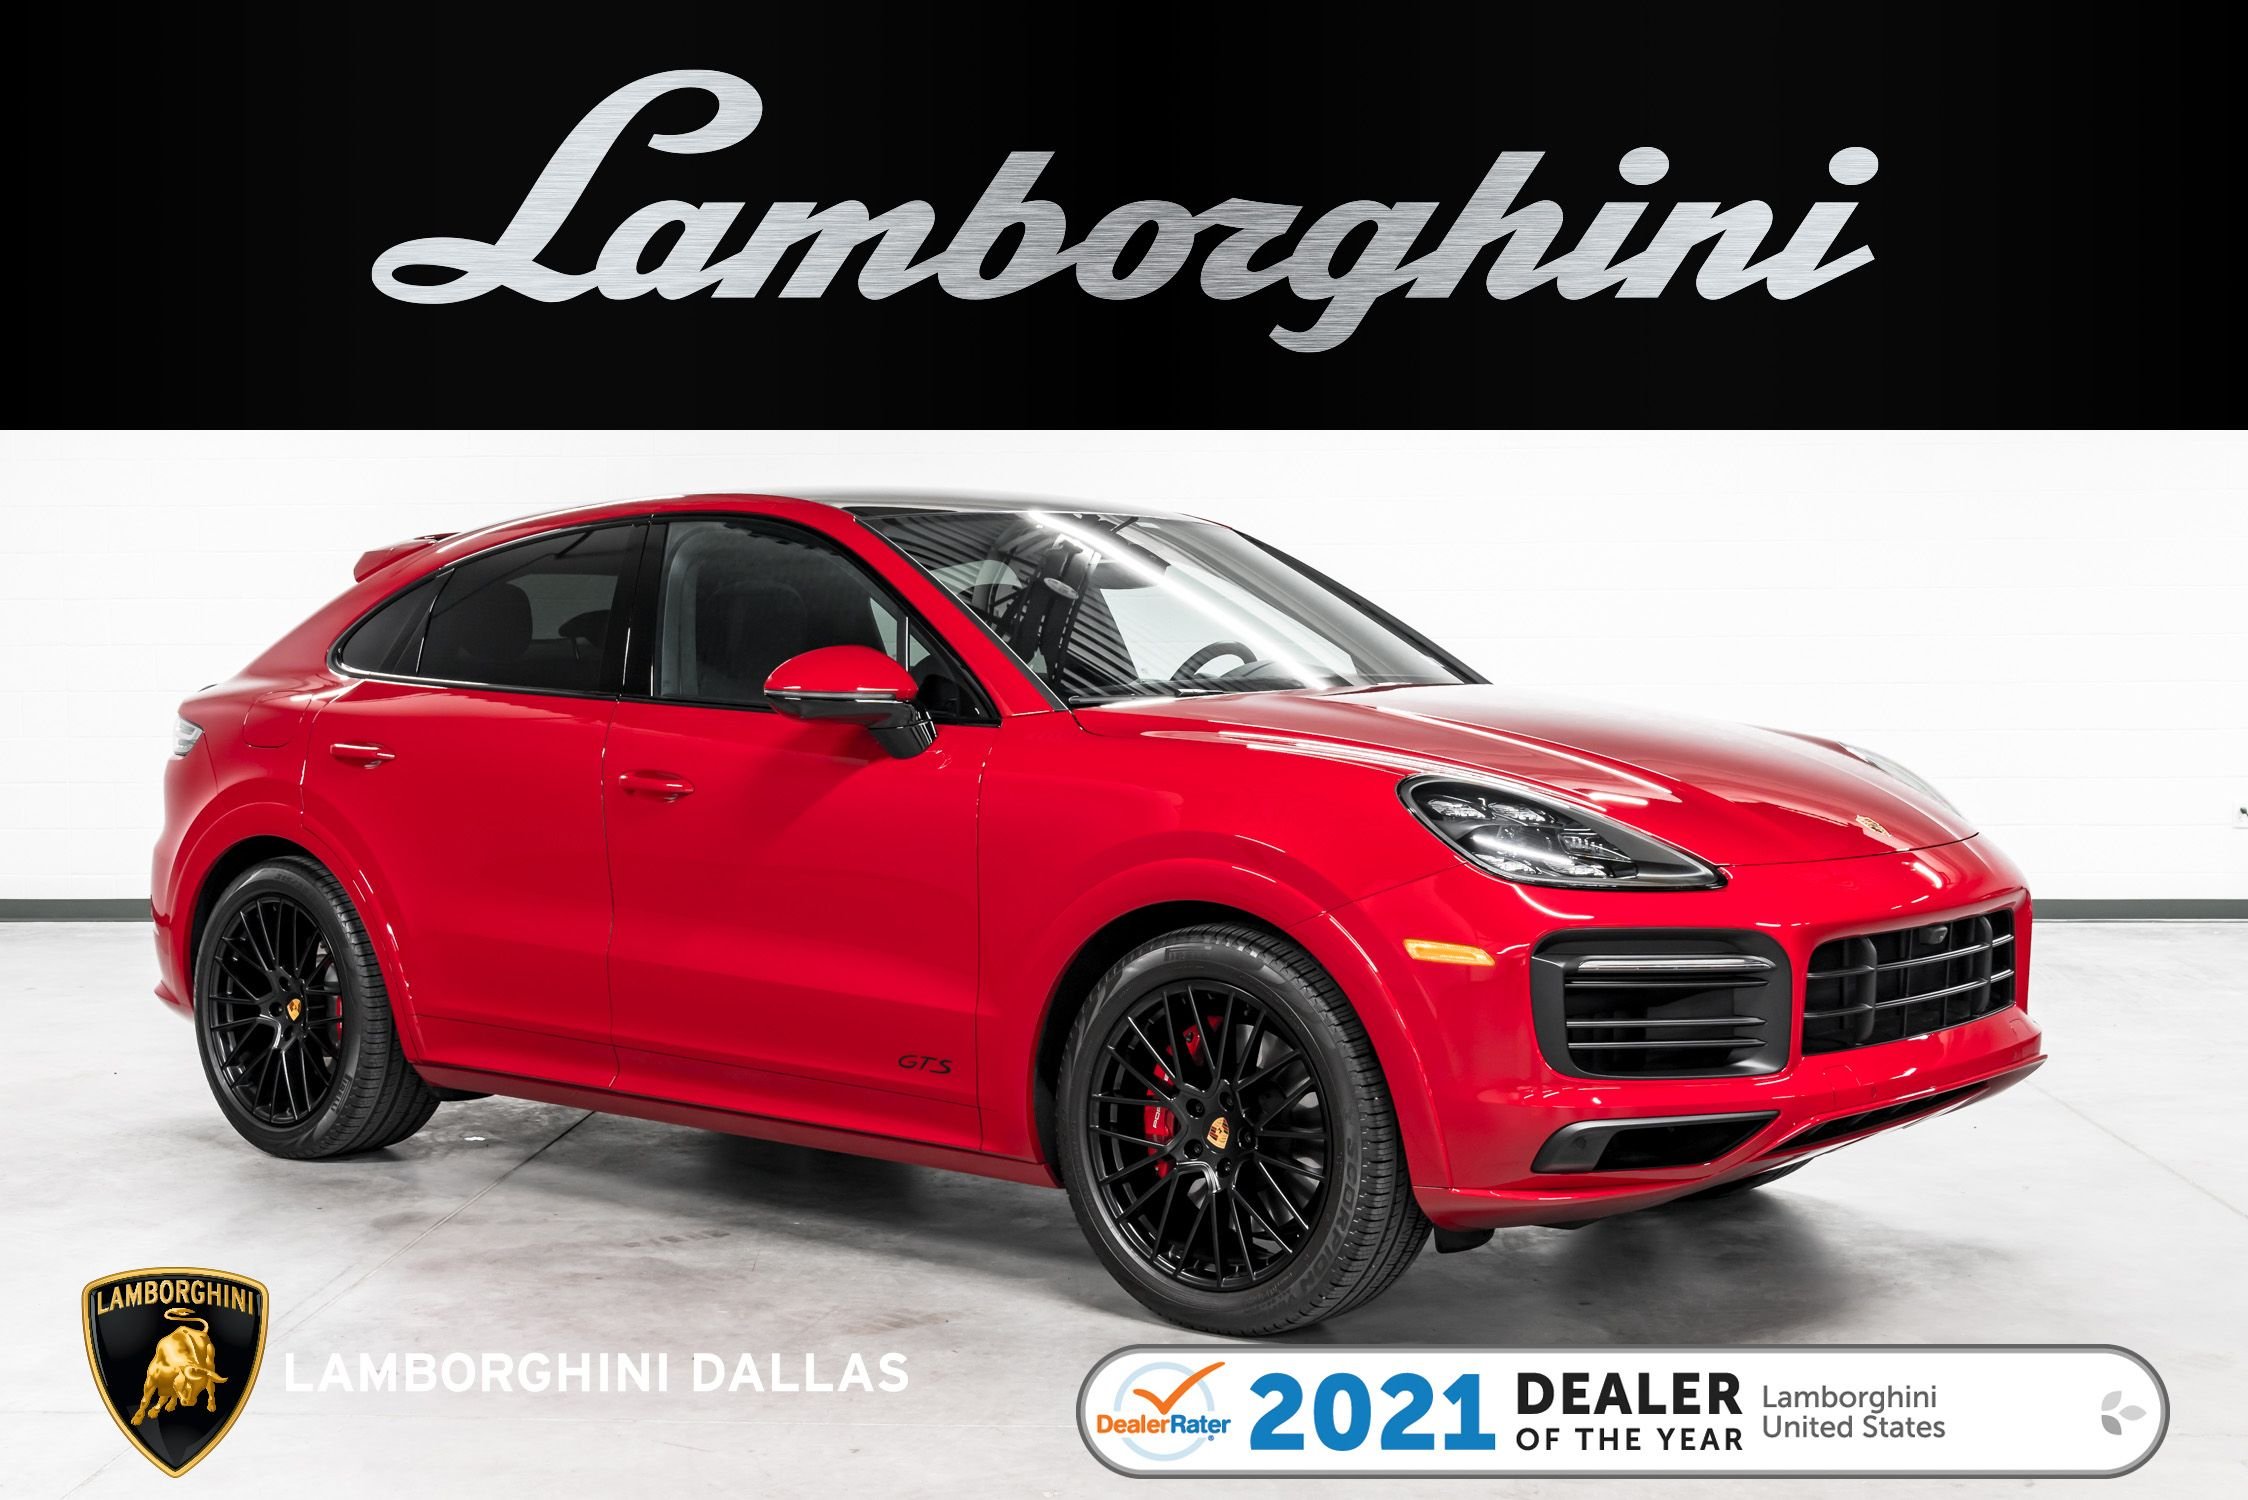 Review update: 2021 Porsche Cayenne GTS Coupe ramps up SUV style